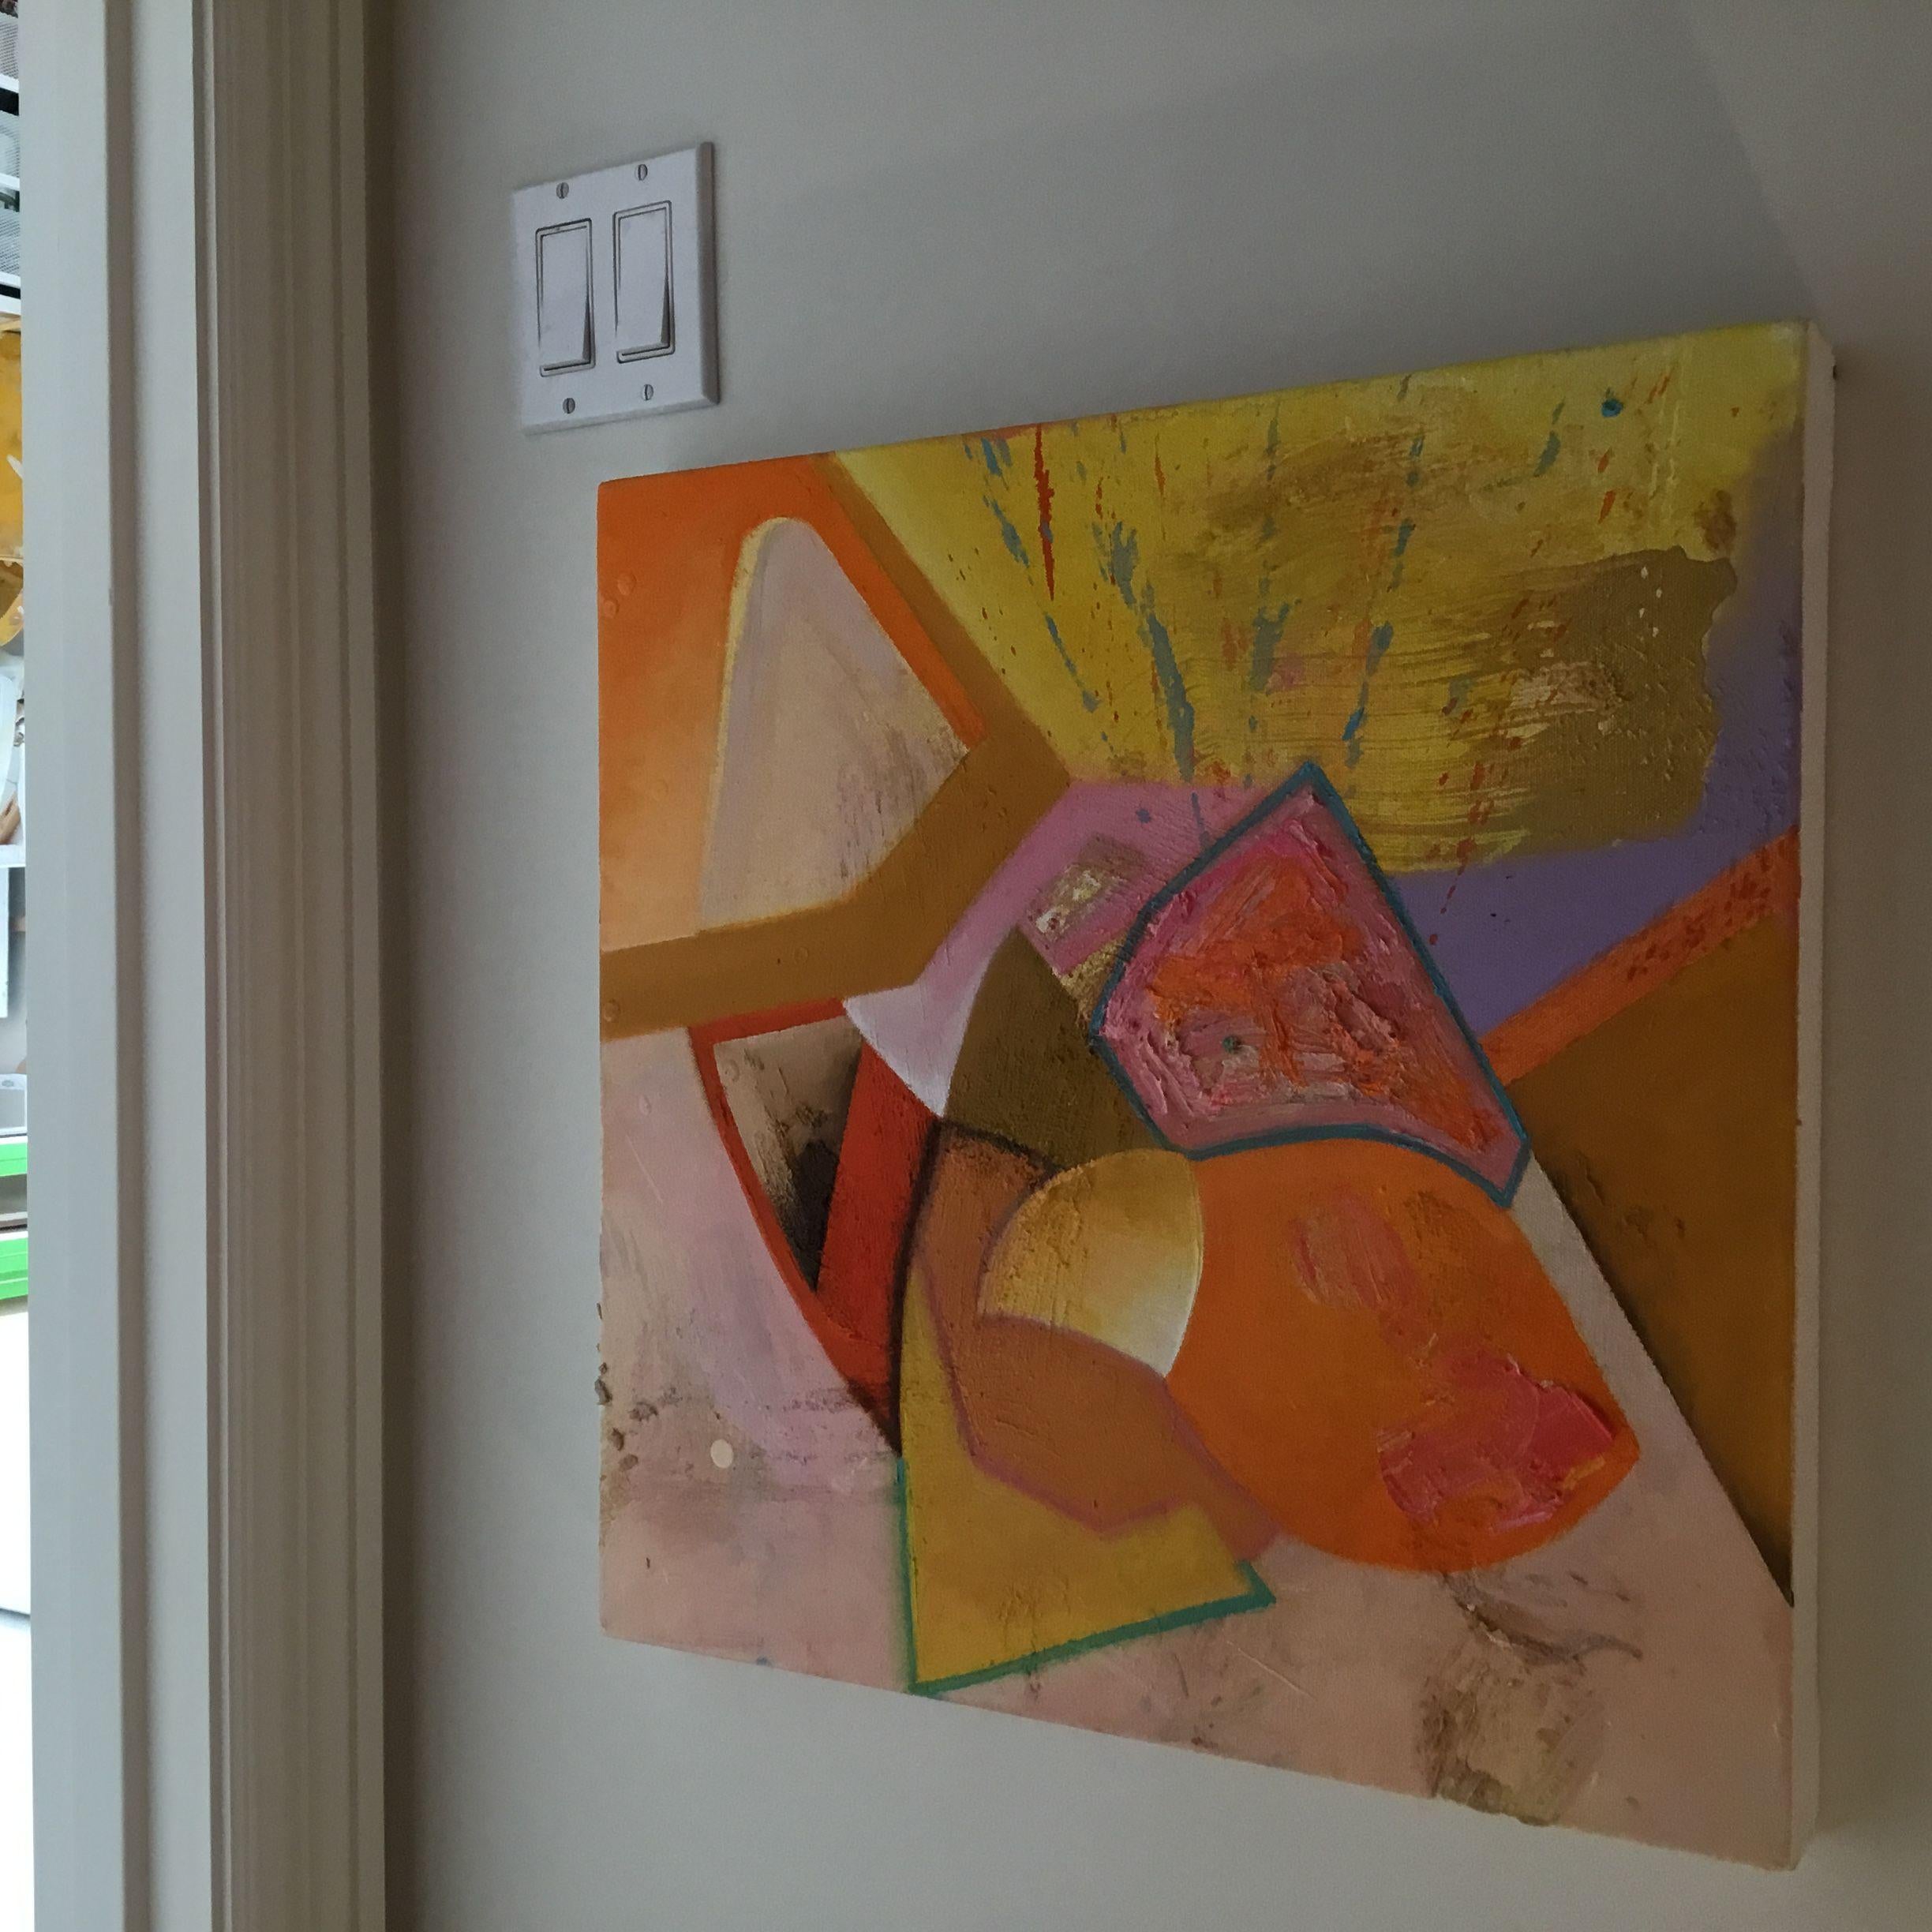 Small contemporary oil painting with beautiful soft, warm colors found right before sunset. Interesting geometric shapes create a sculptural feeling. Using various thicknesses and textures of oil paint, the feeling of movement and dimension are